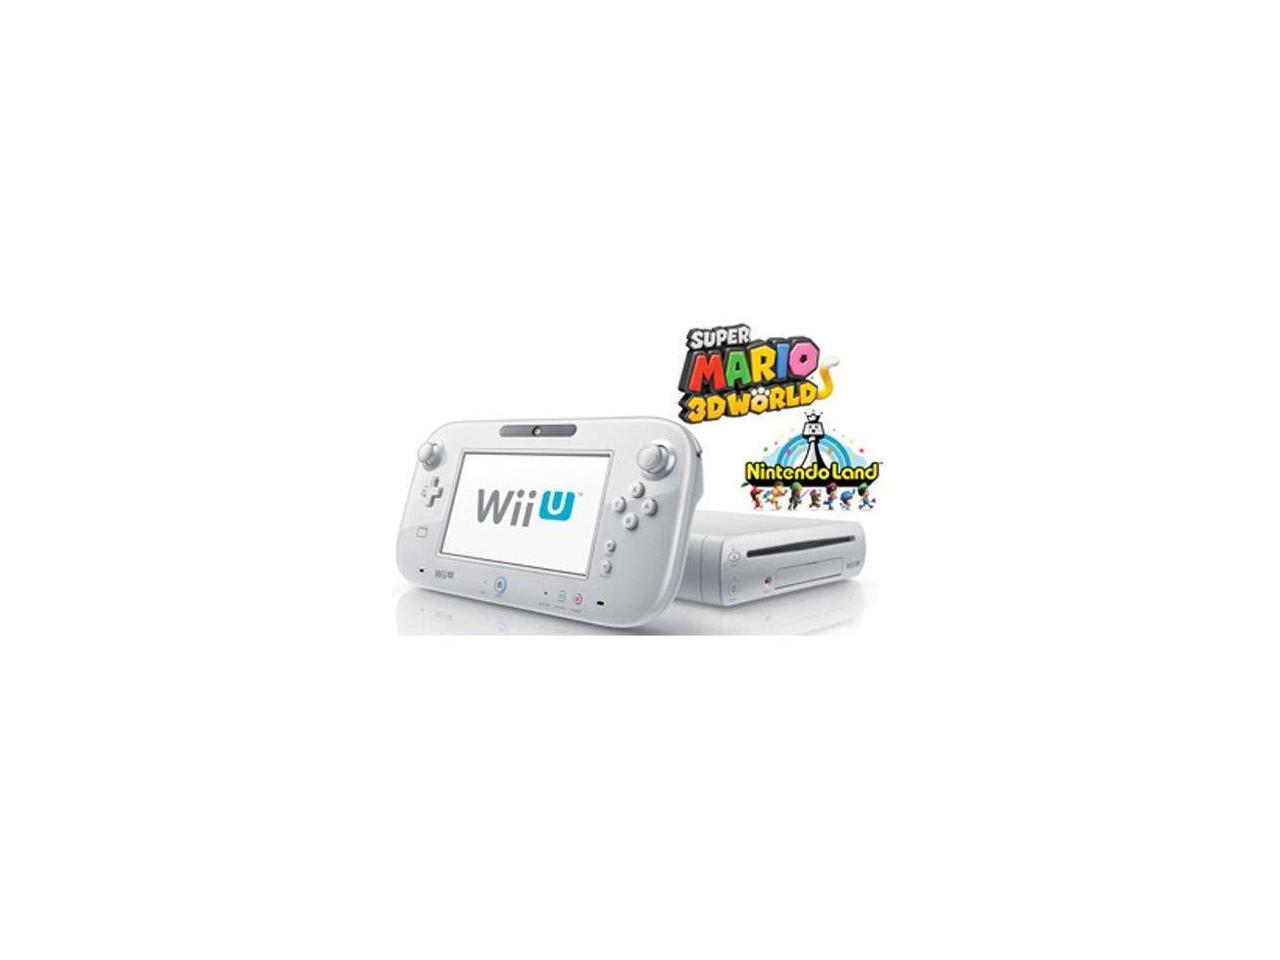 Refurbished Wii U Deluxe Set 8gb White With Super Mario 3d World And Nintendo Land Newegg Com - wii bowling bypassed roblox id